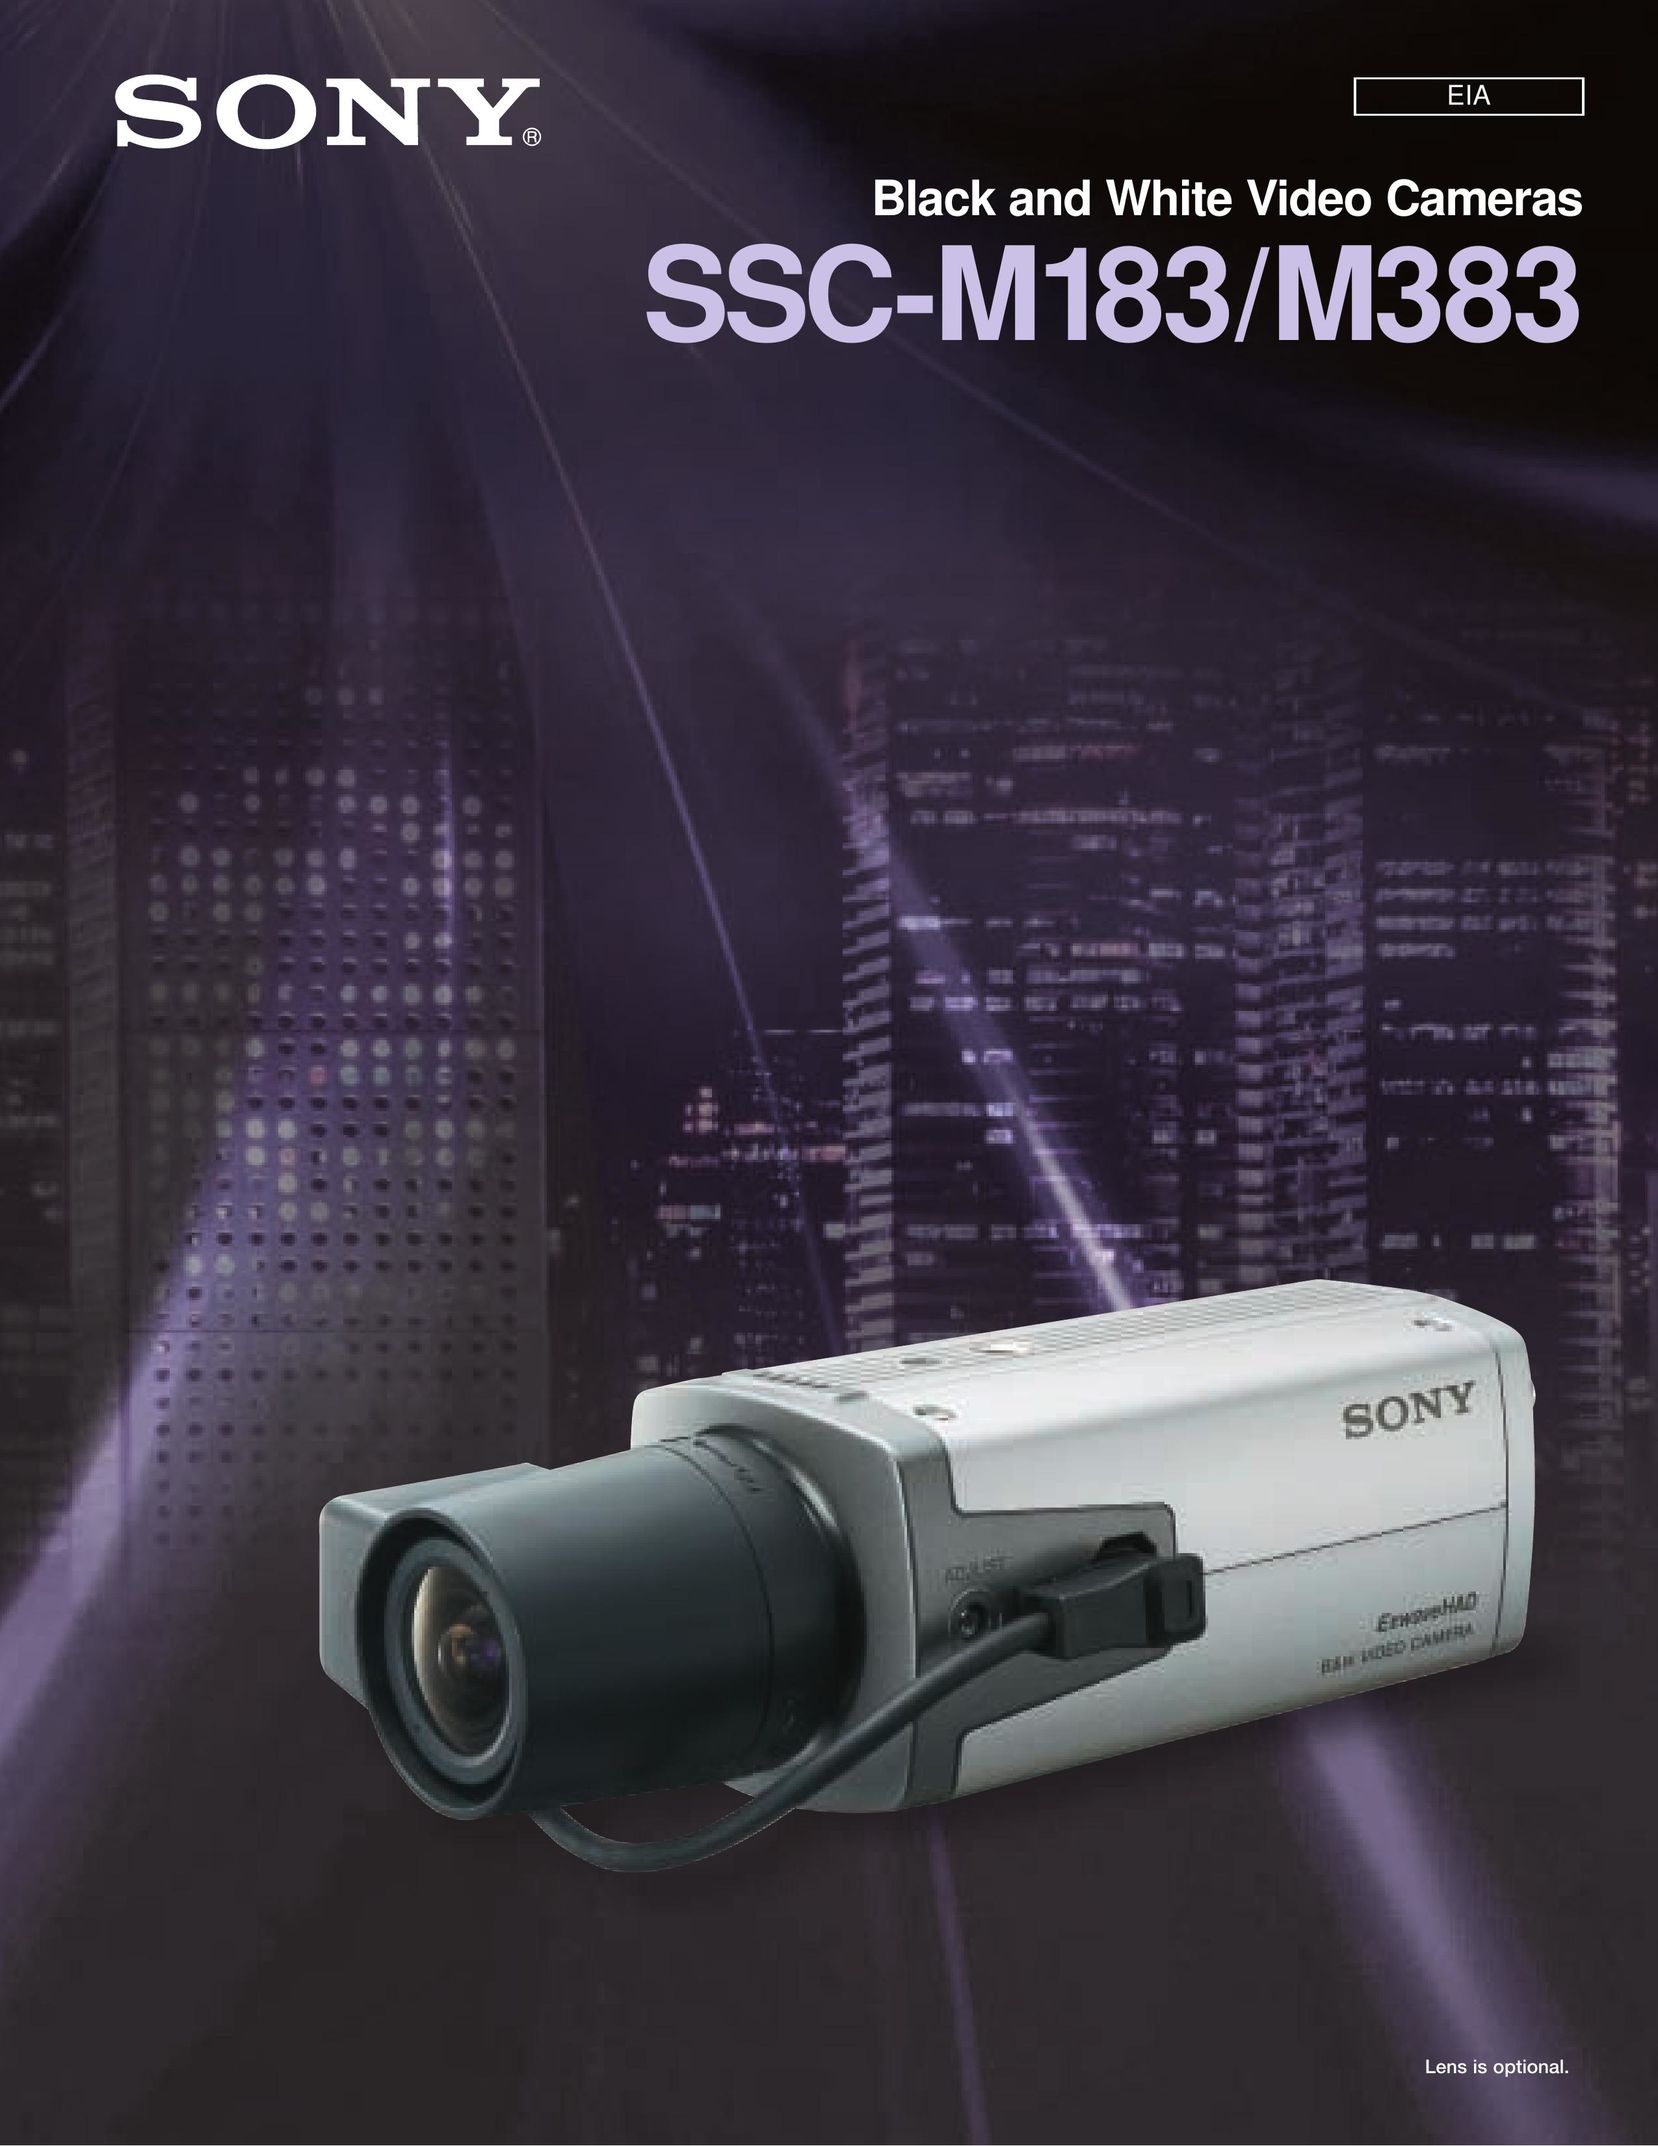 Sony Ssc-M383 Home Security System User Manual